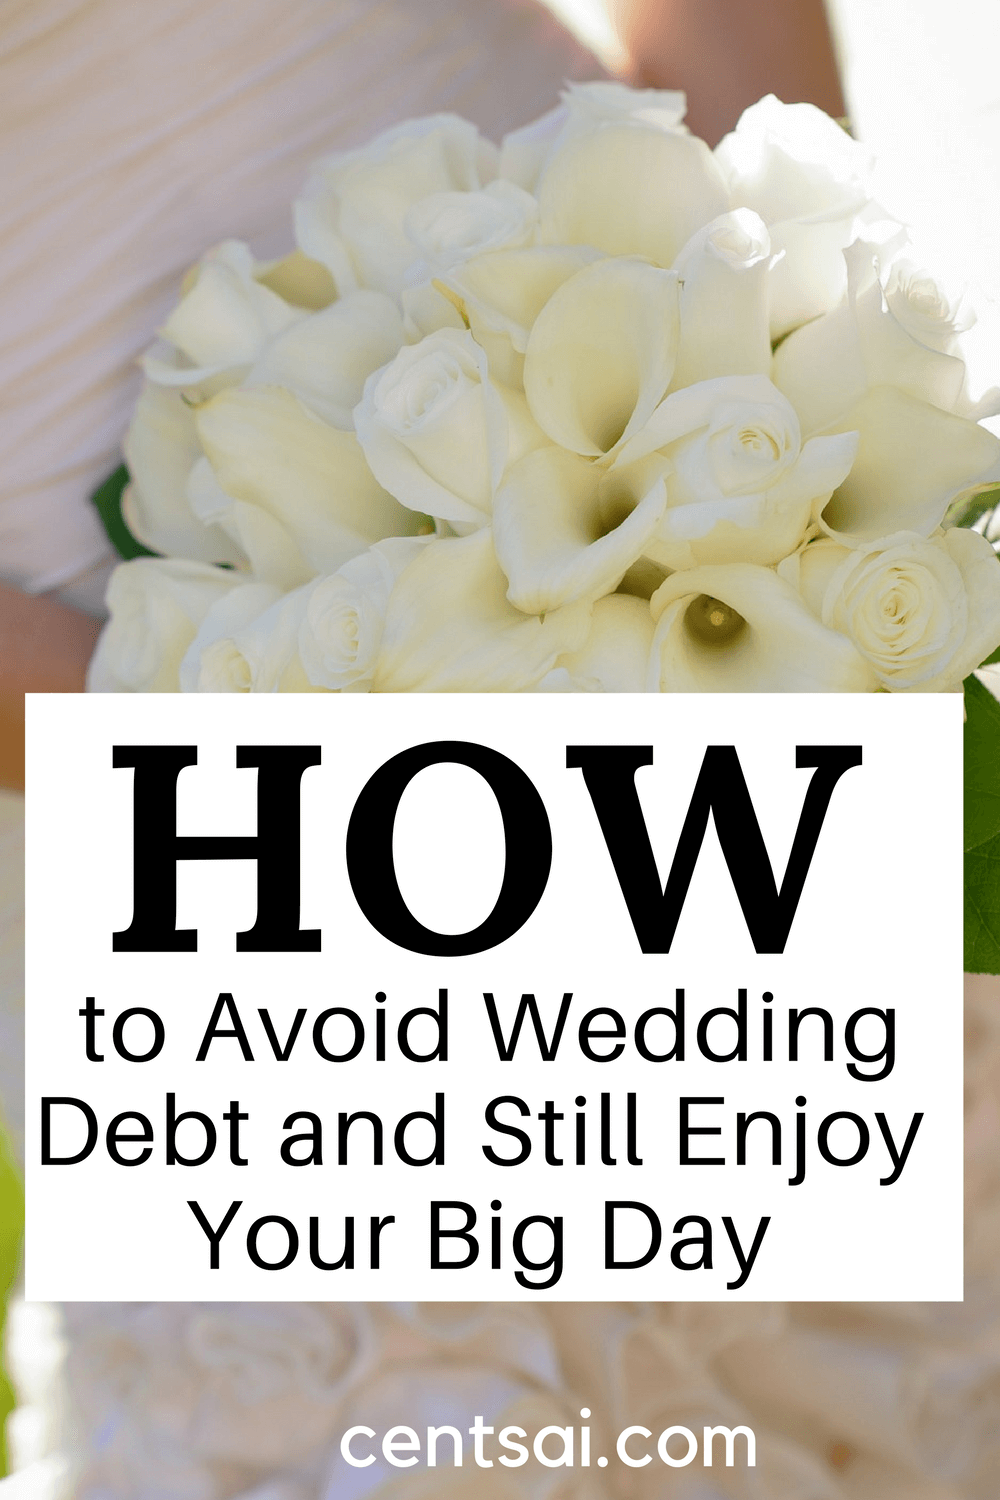 How to Avoid Wedding Debt and Still Enjoy Your Big Day. Weddings can be incredibly expensive for the average couple. Here's how to plan your big day without ending up in wedding debt.